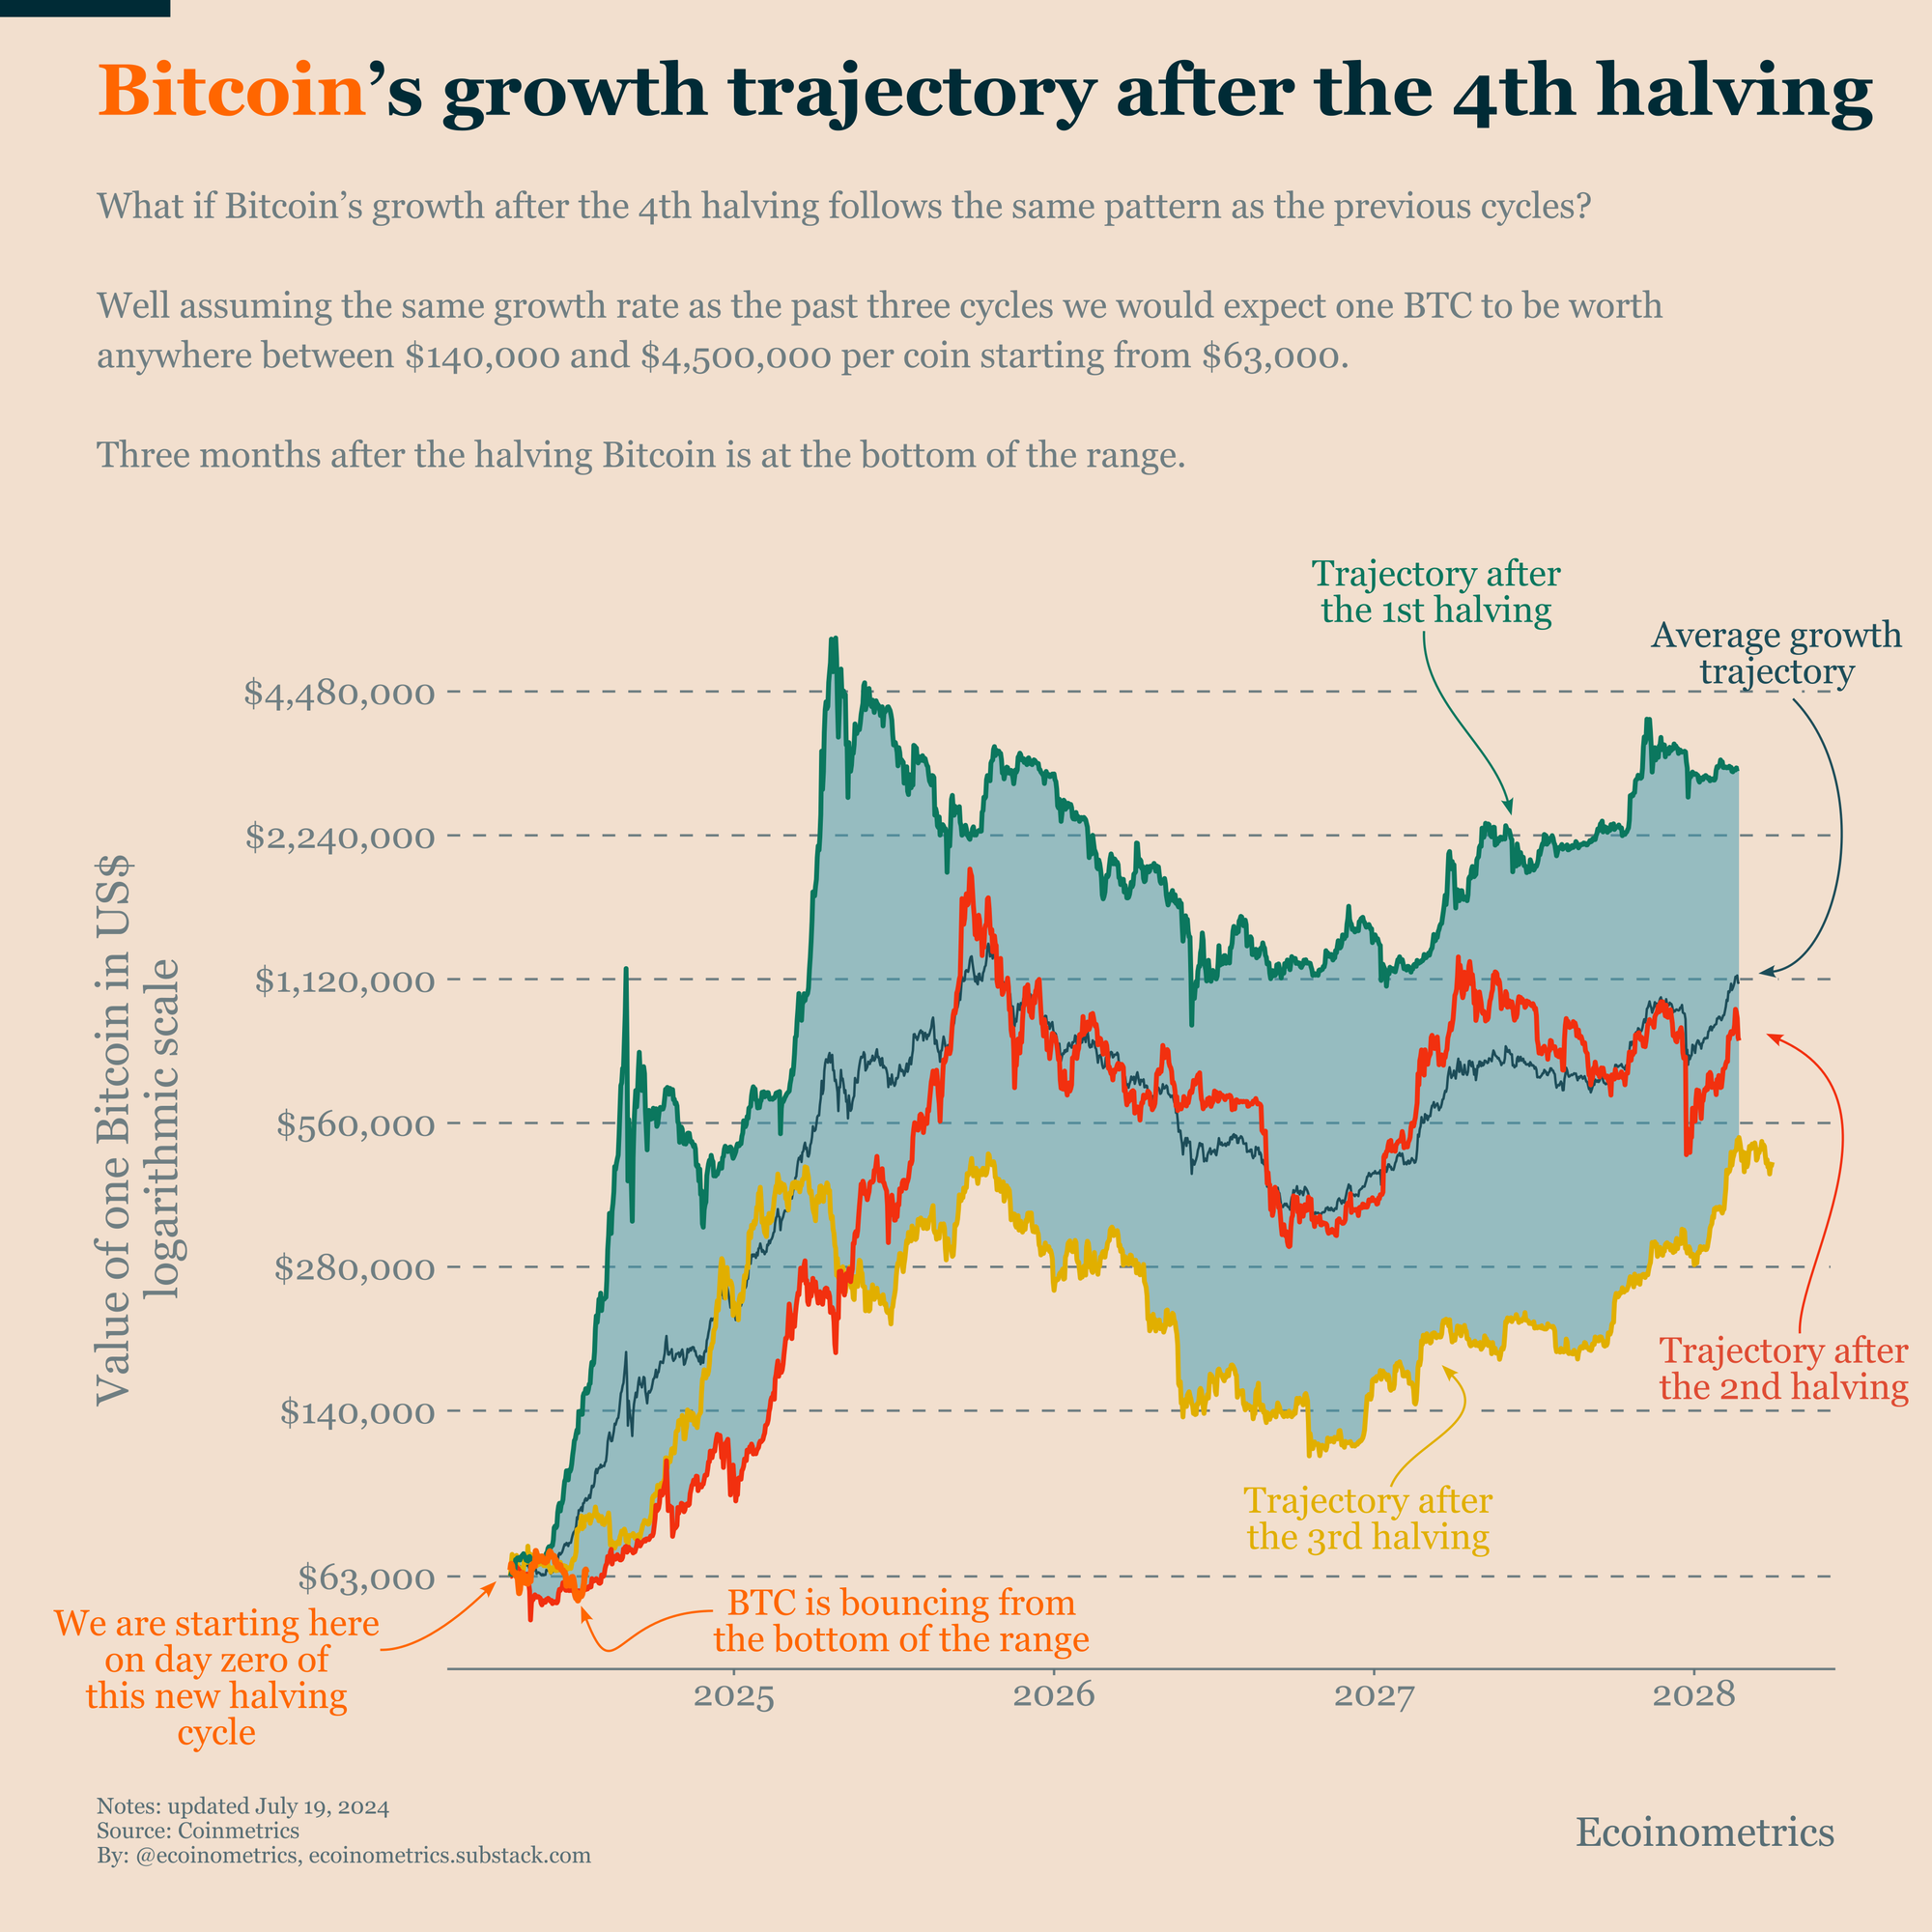 Bitcoin's growth trajectory after the third halving (log scale).